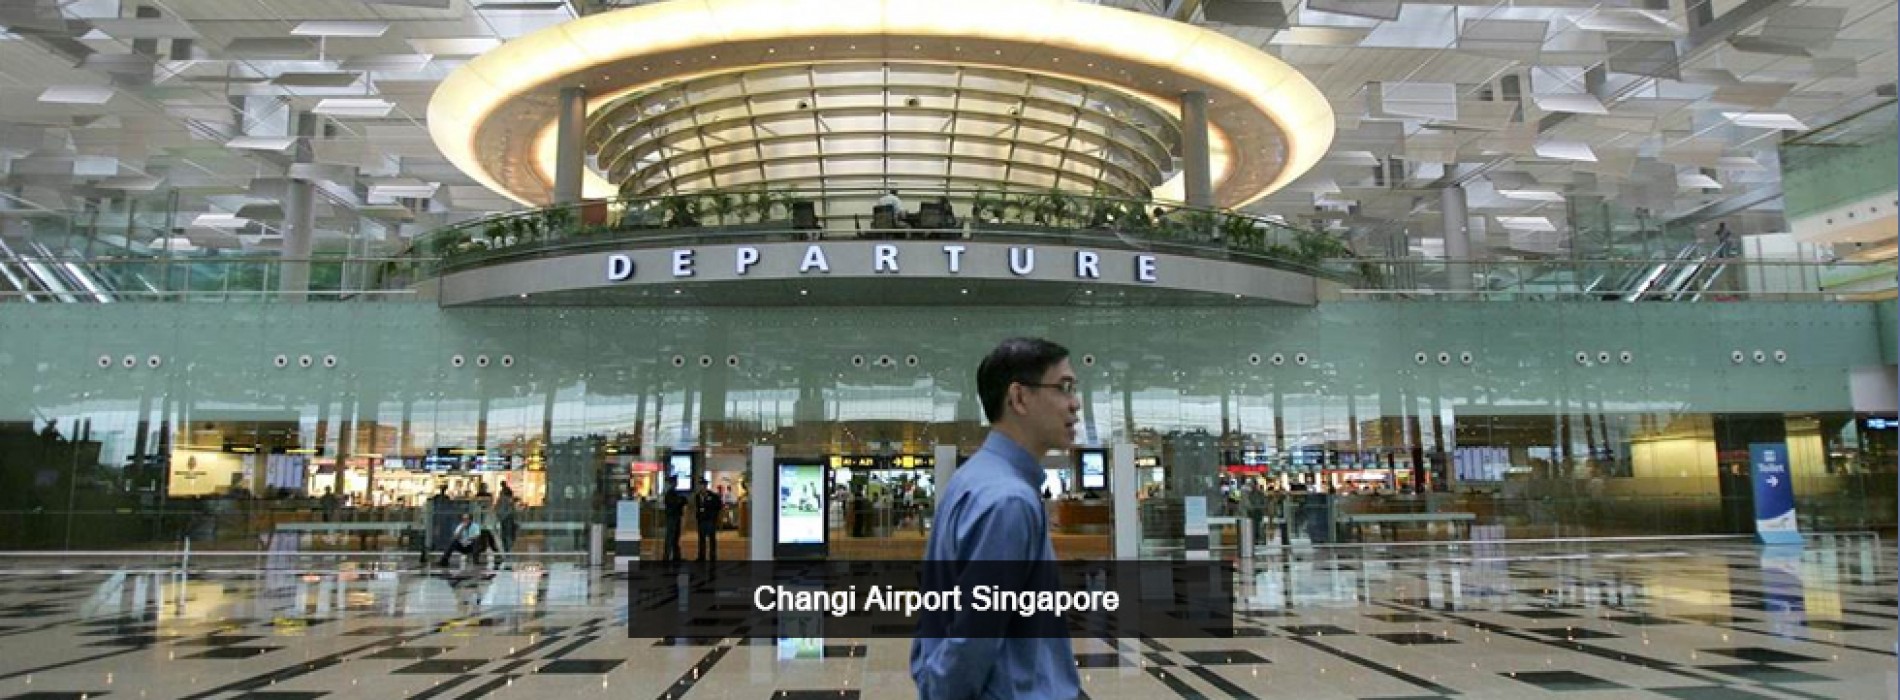 Changi Airport is named the World’s Best Airport for the fifth consecutive year